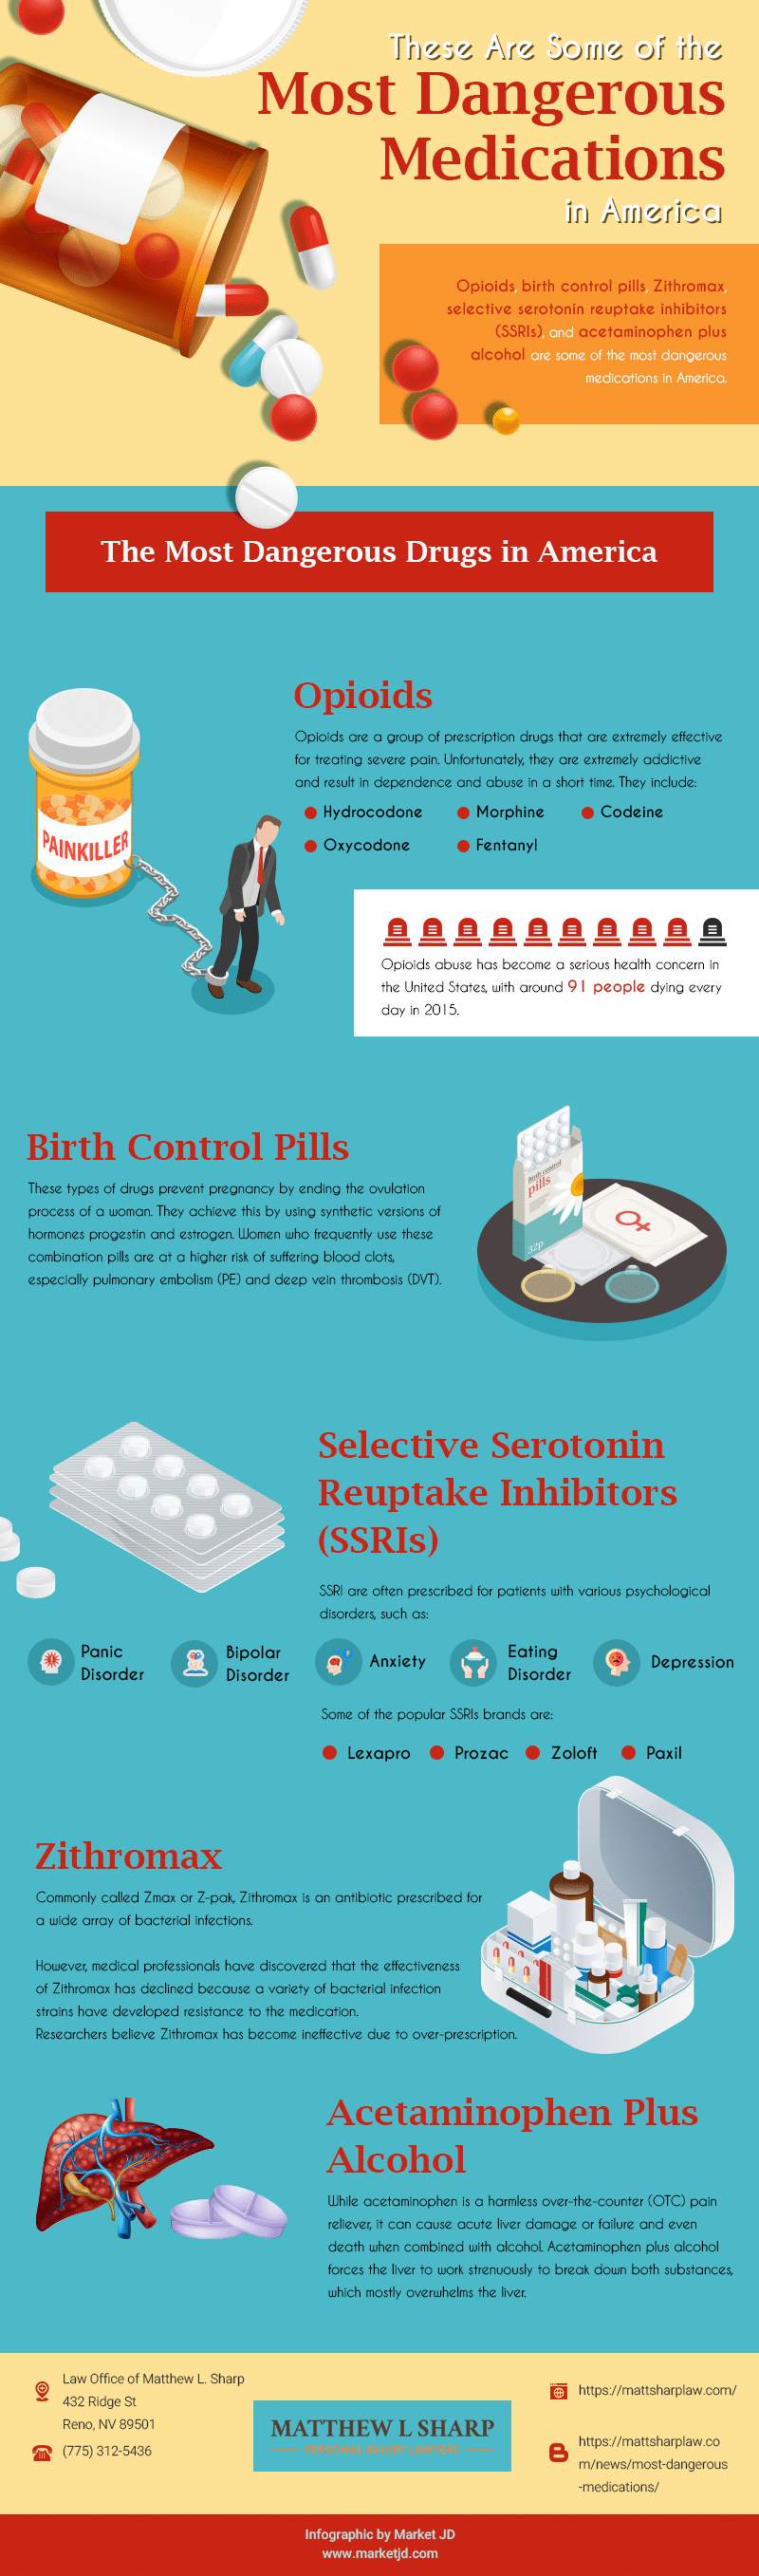 Most dangerous medications in America infographic